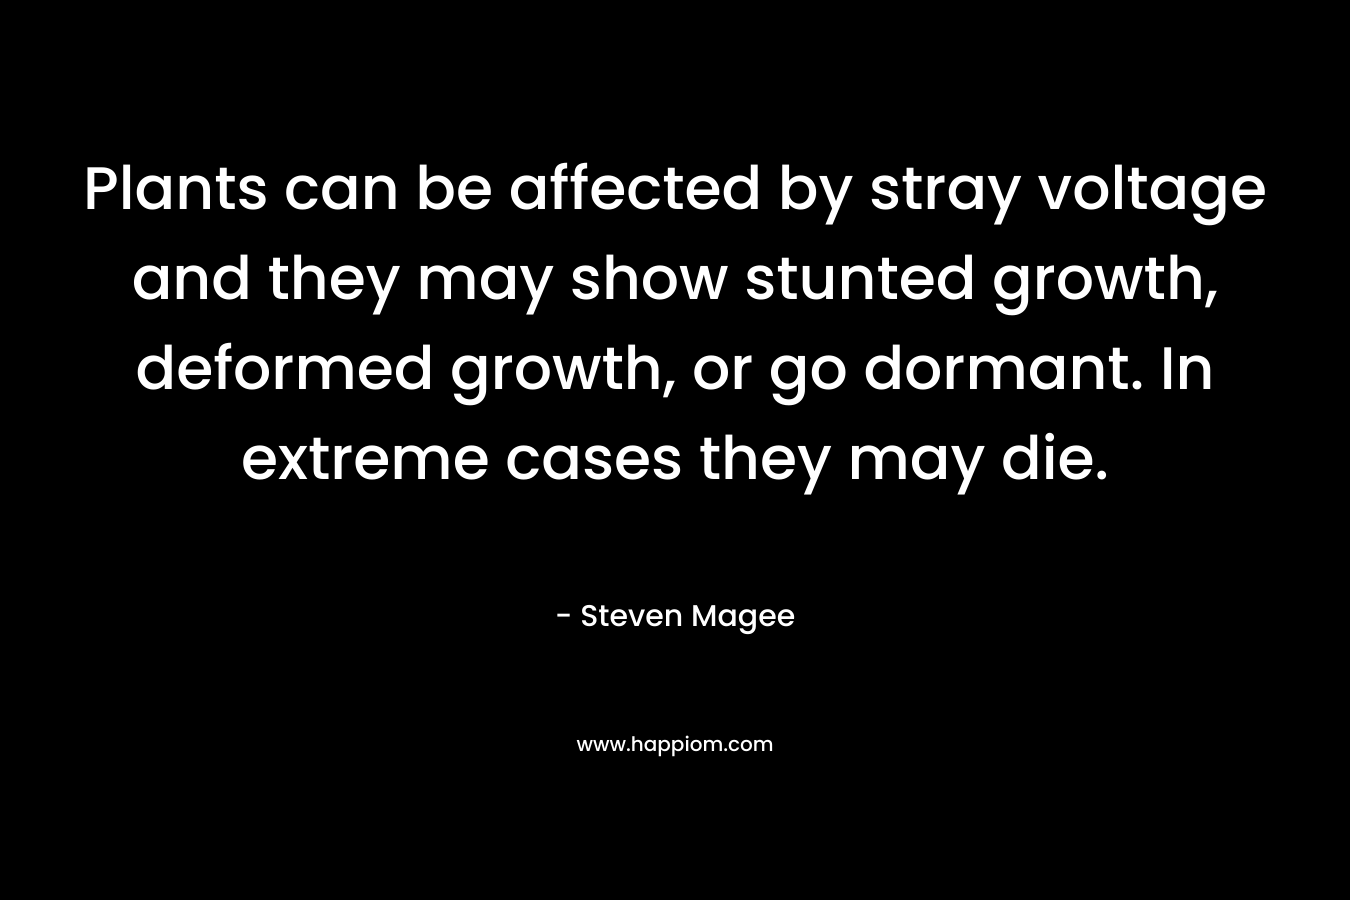 Plants can be affected by stray voltage and they may show stunted growth, deformed growth, or go dormant. In extreme cases they may die.